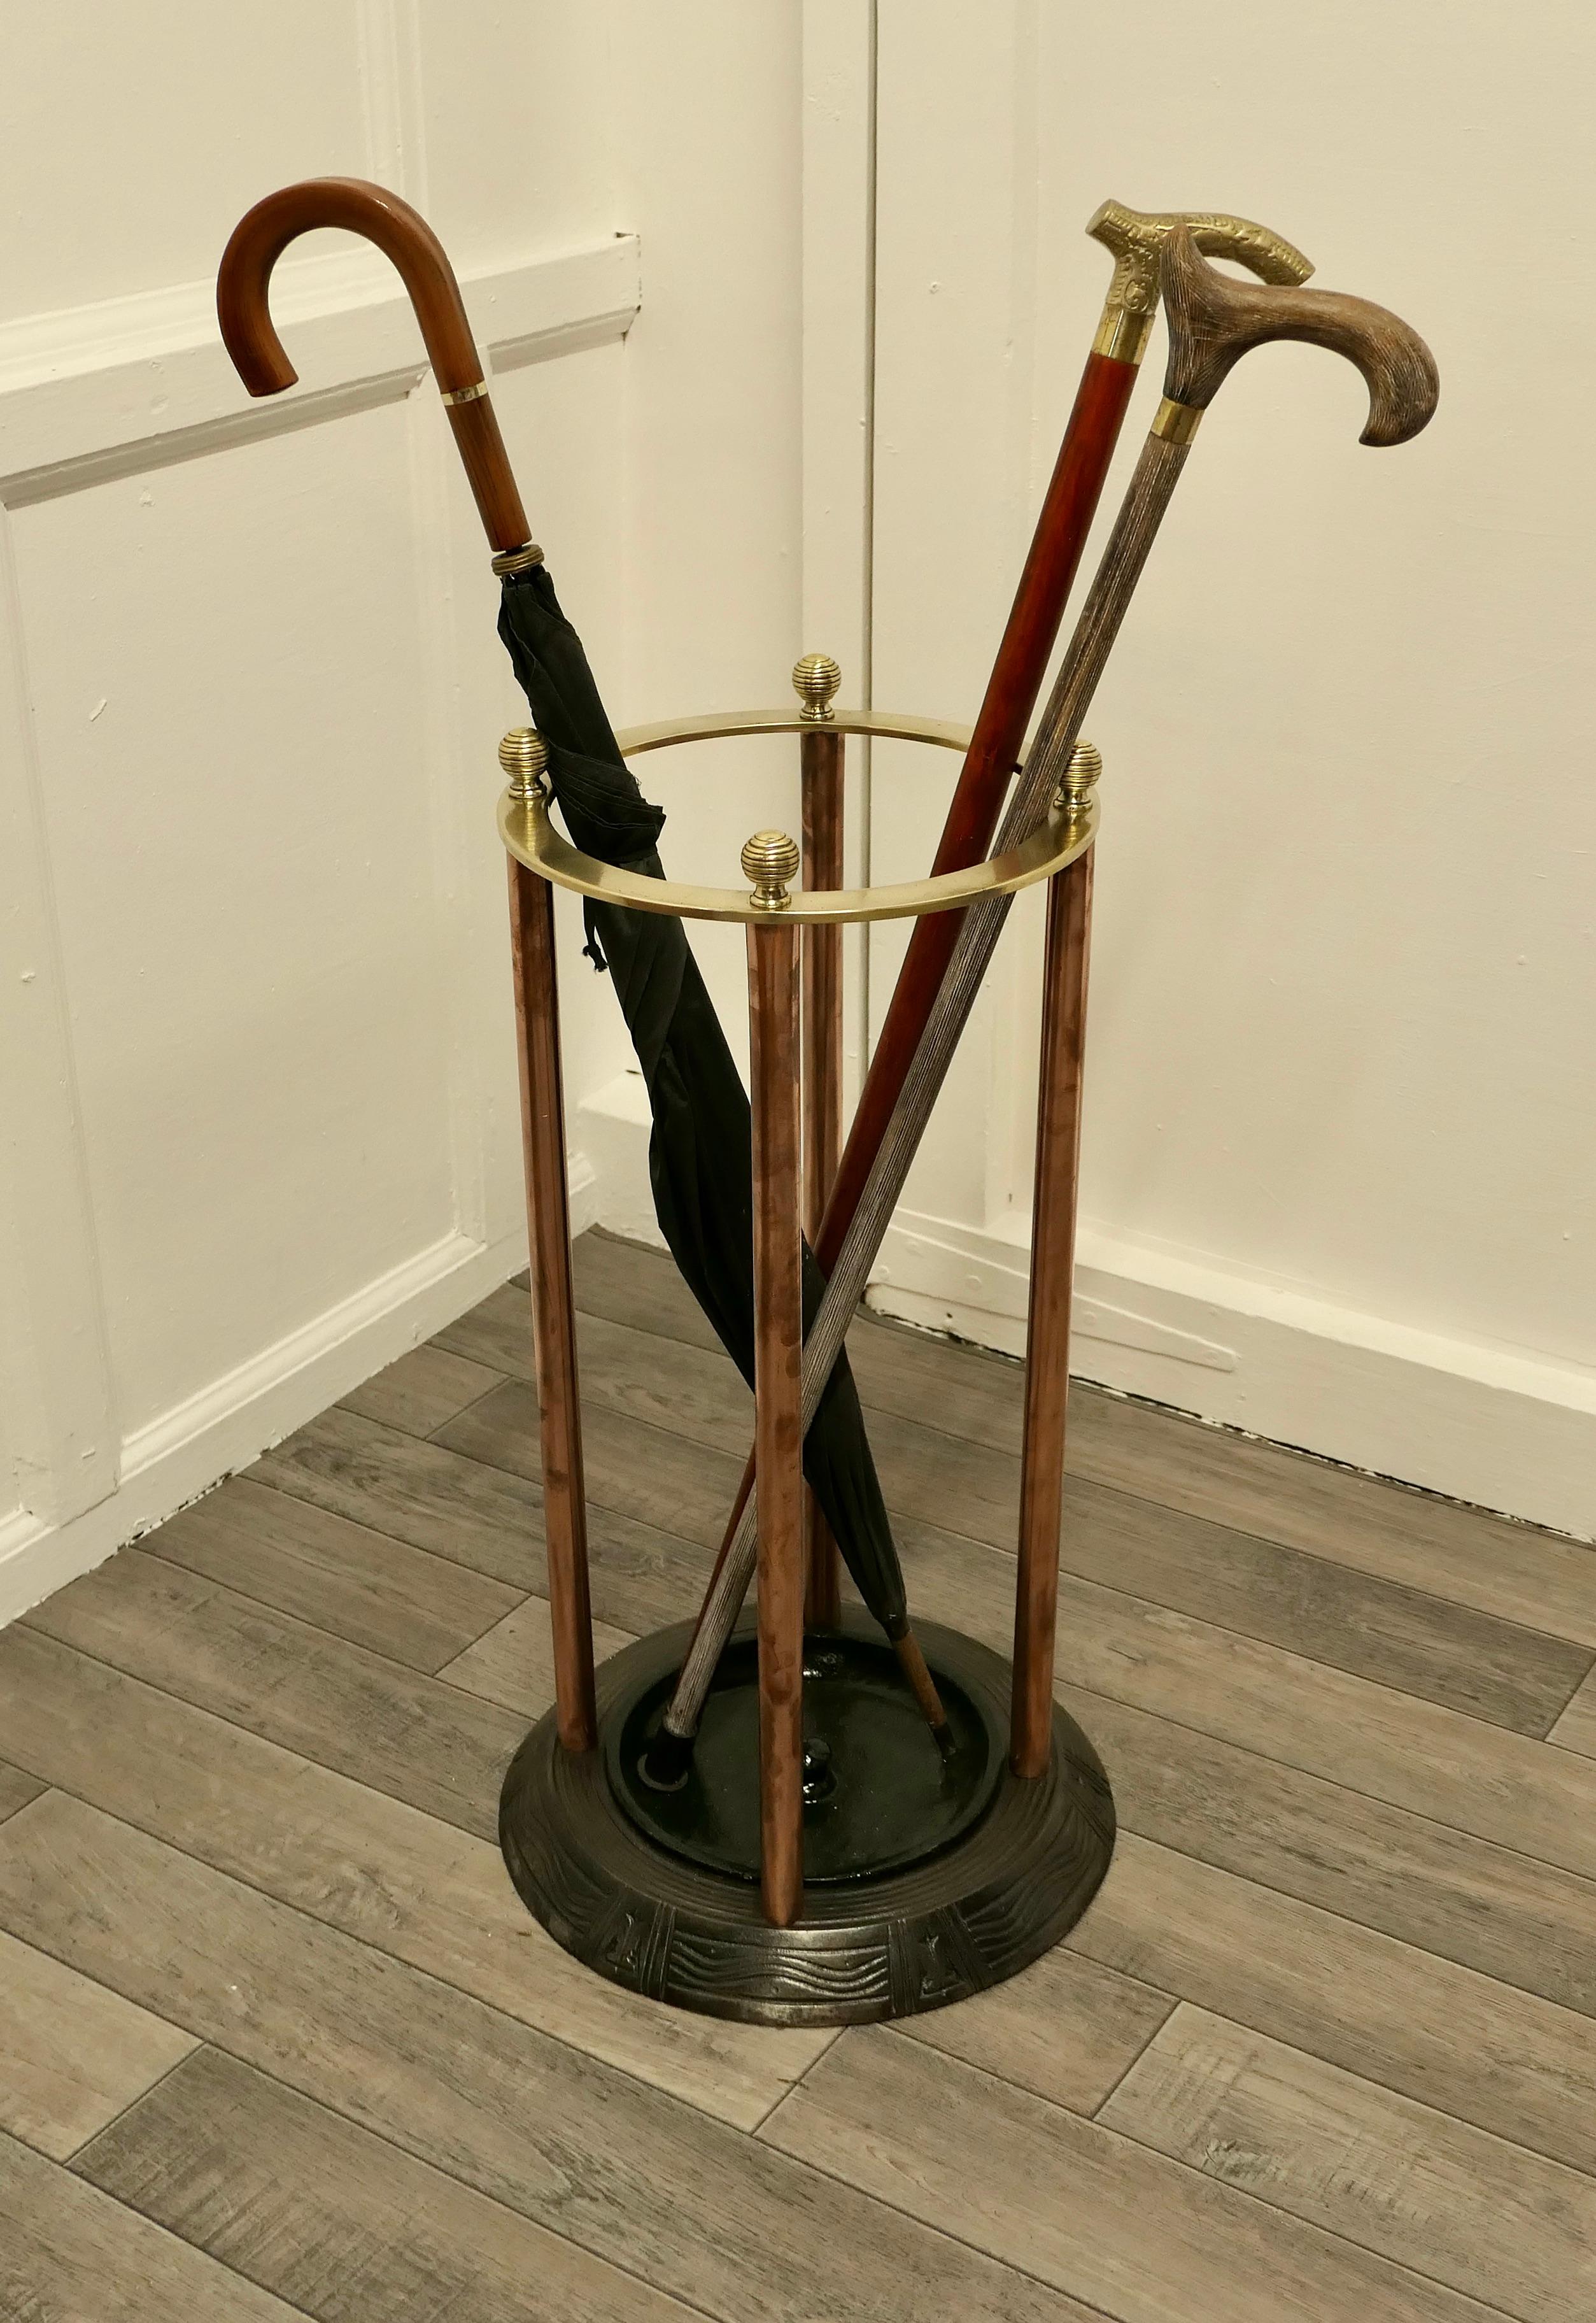 An Art Deco brass and cast iron Nautical stick or umbrella stand

A very Stylish piece, the stand sits neatly in a small space the round base has a nautical decoration of waves and anchors, very useful where space is scarce. It has a brass rail